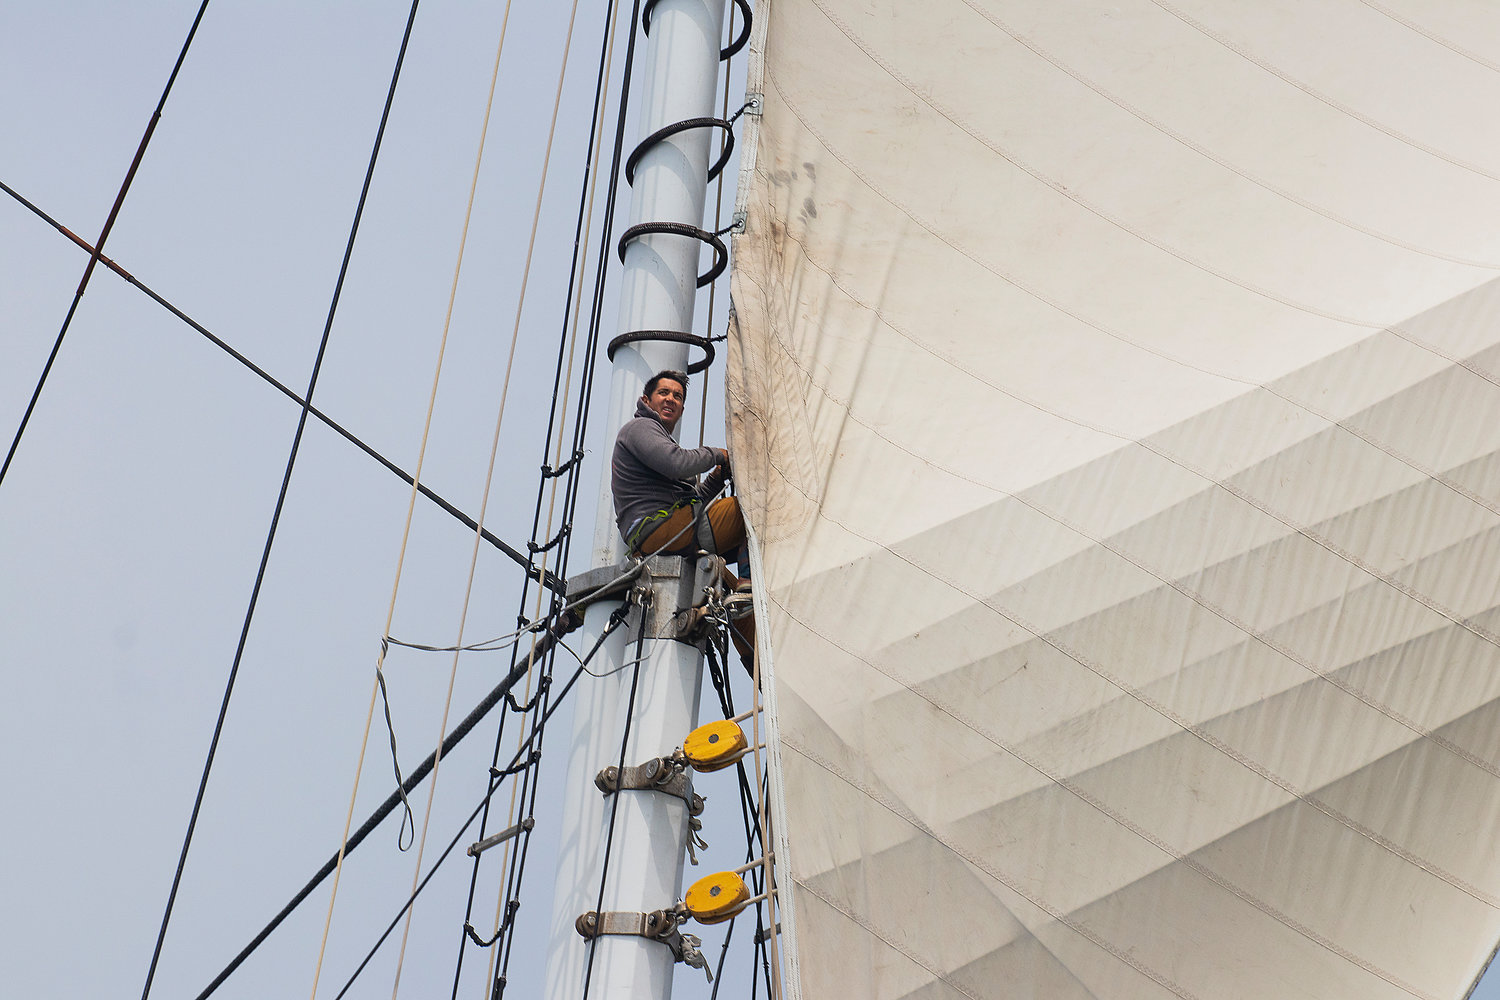 A crewman aboard the Columbia, a Herreshoff racing schooner owned by Martin Sutter of the CCA and NYYC, prepares a sail.